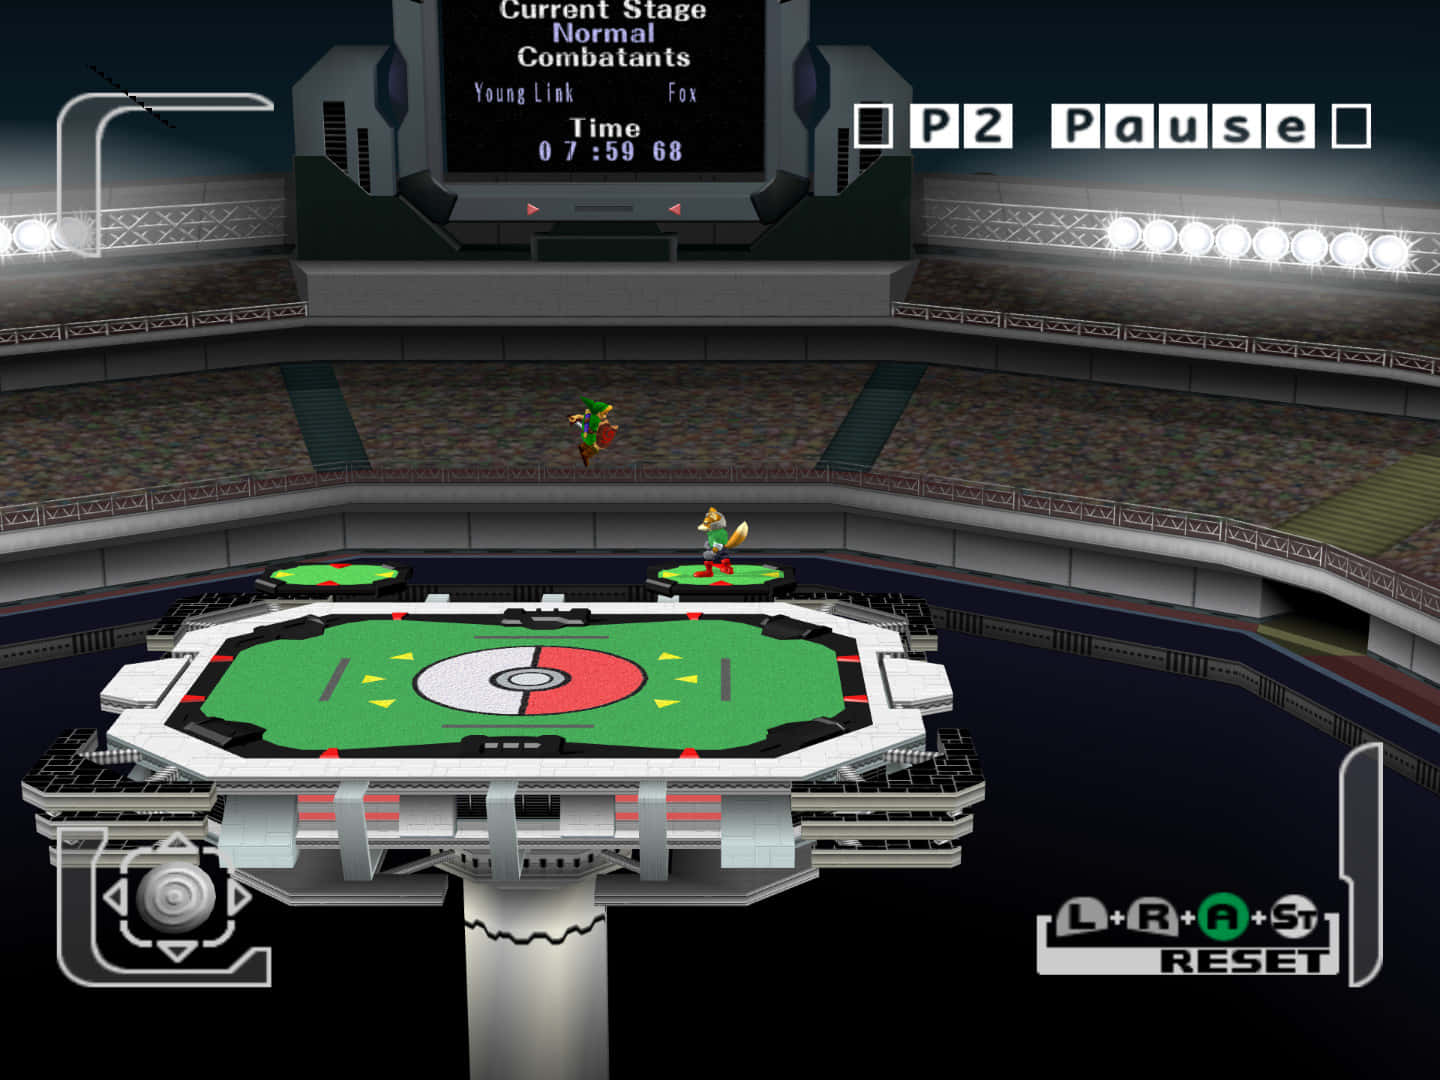 Get Ready For The Battle Of A Lifetime! Enter The Pokemon Stadium Now! Wallpaper